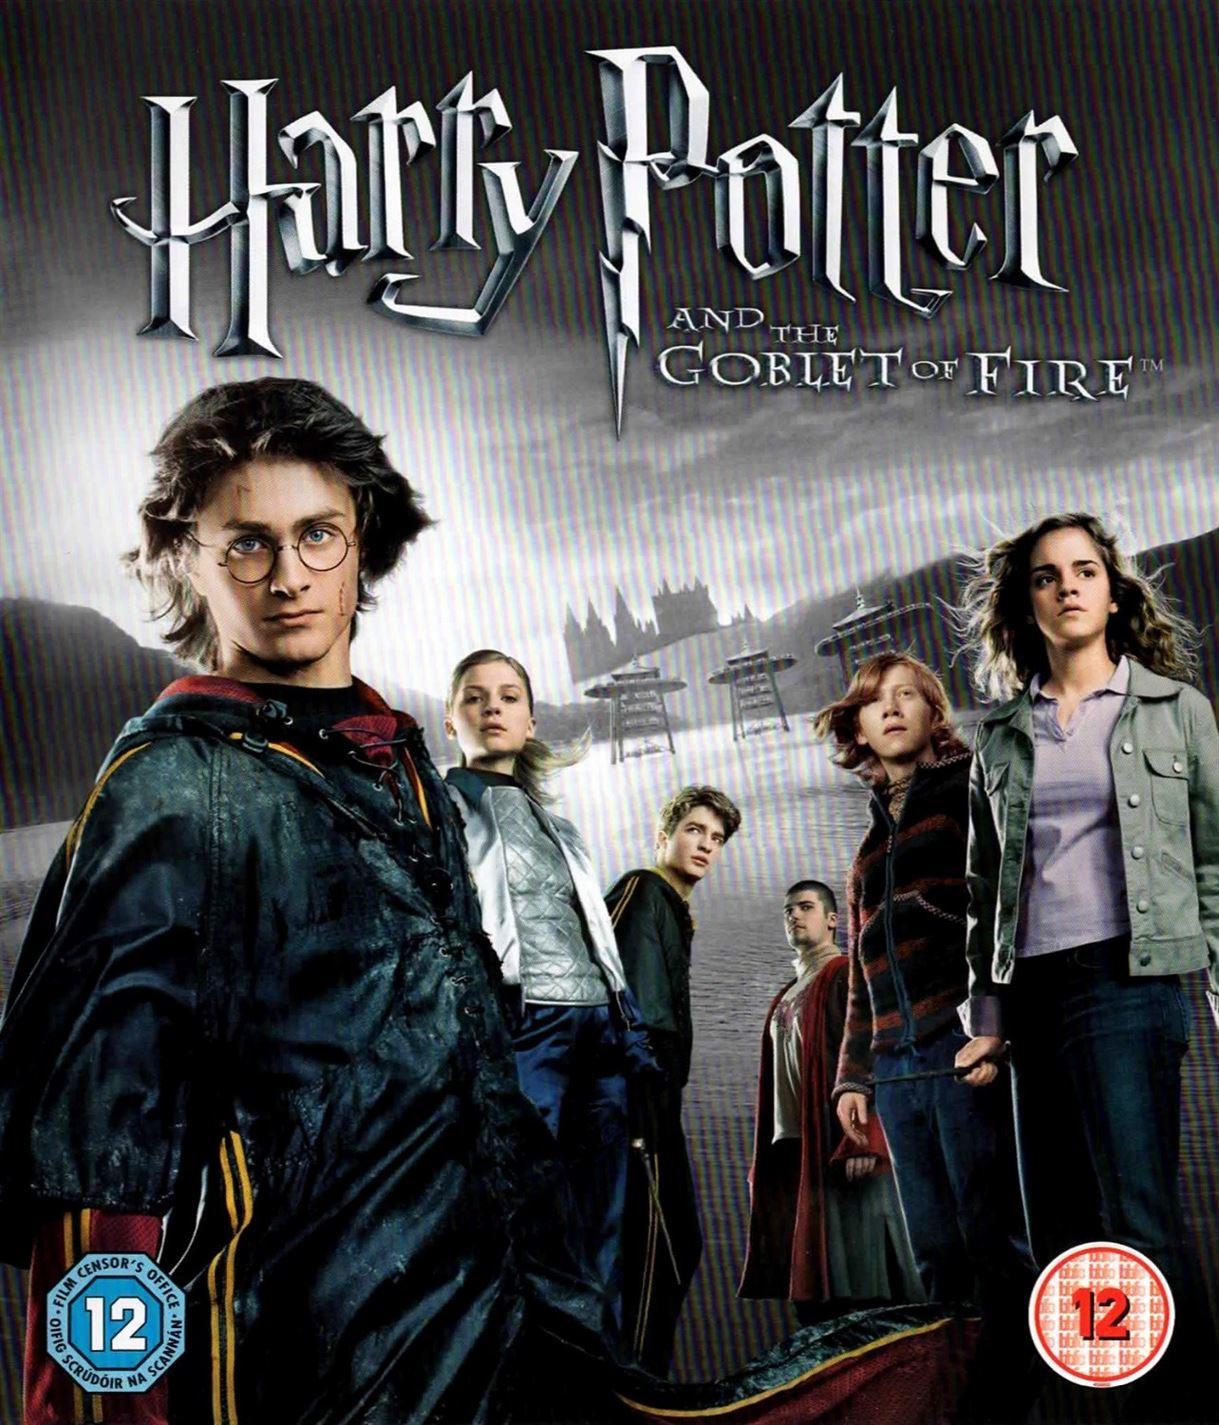 Harry Potter and the Goblet of Fire (HD DVD) - UK Seller